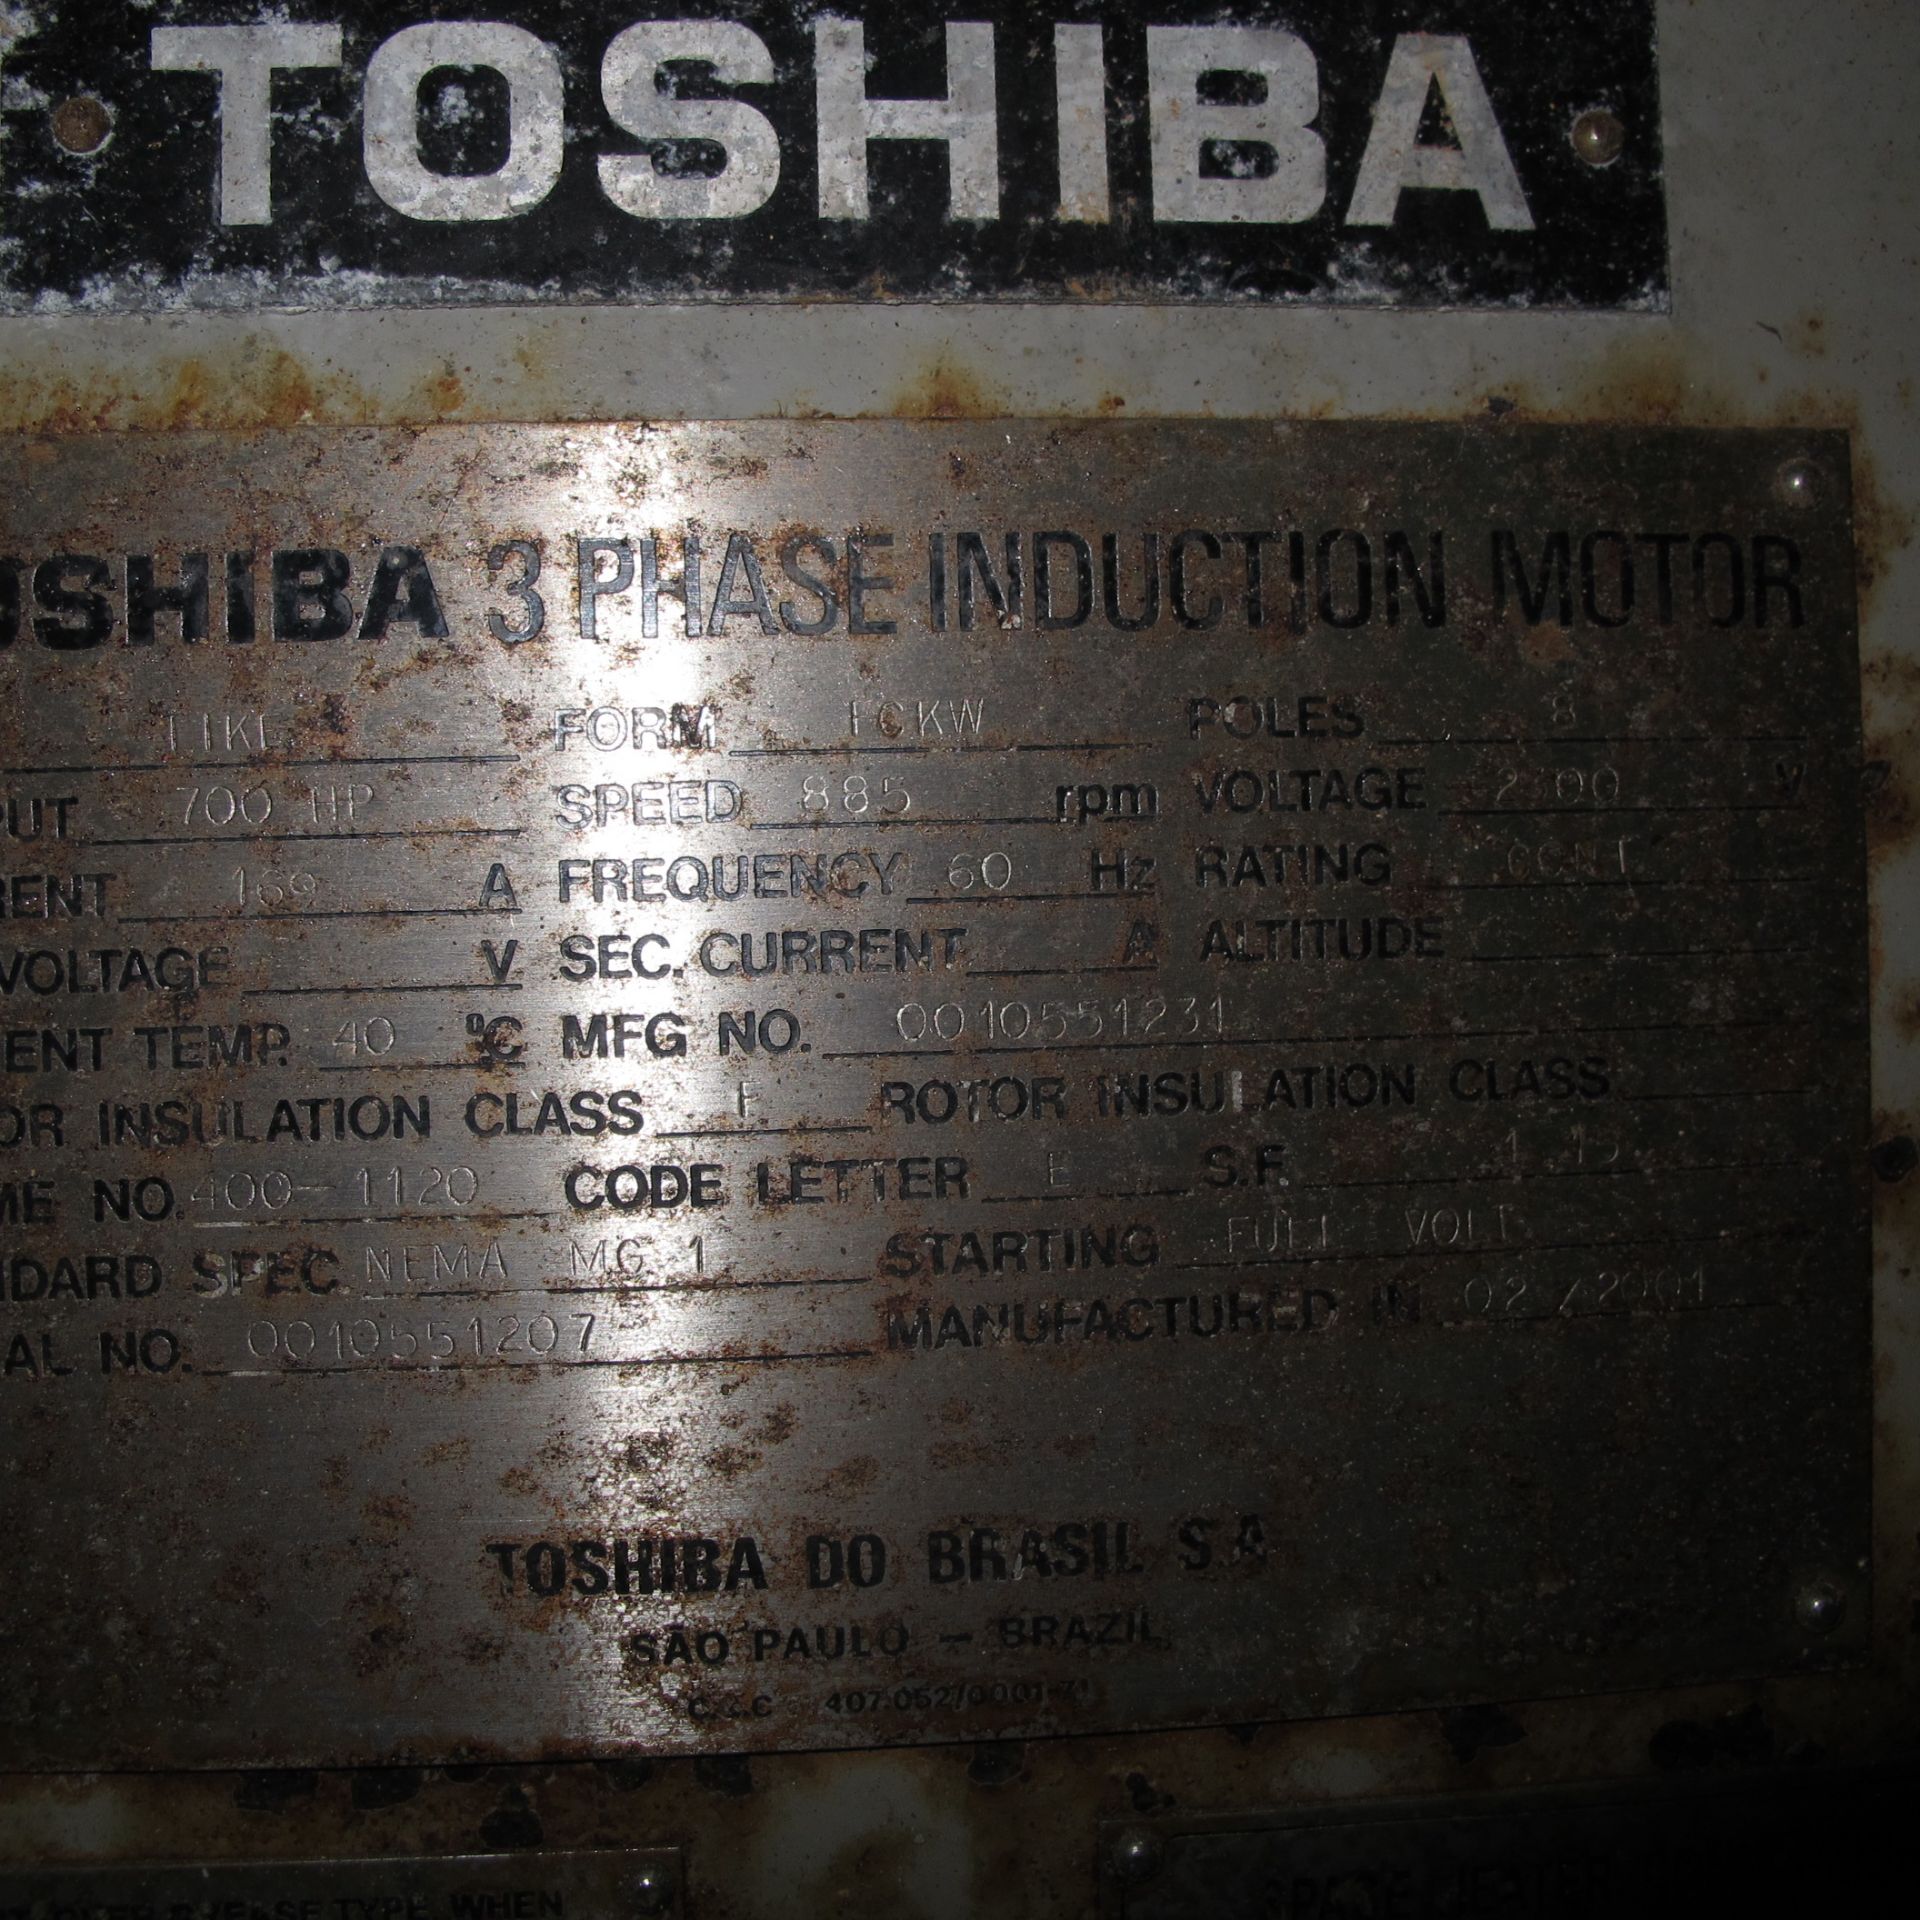 TOSHIBA TIKE FCKW A/C MOTOR, 700 HP, 900 RPM, 400-1120 FRAME, A-LINE PRIMARY CLEANERS FEED PUMP ( - Image 2 of 3